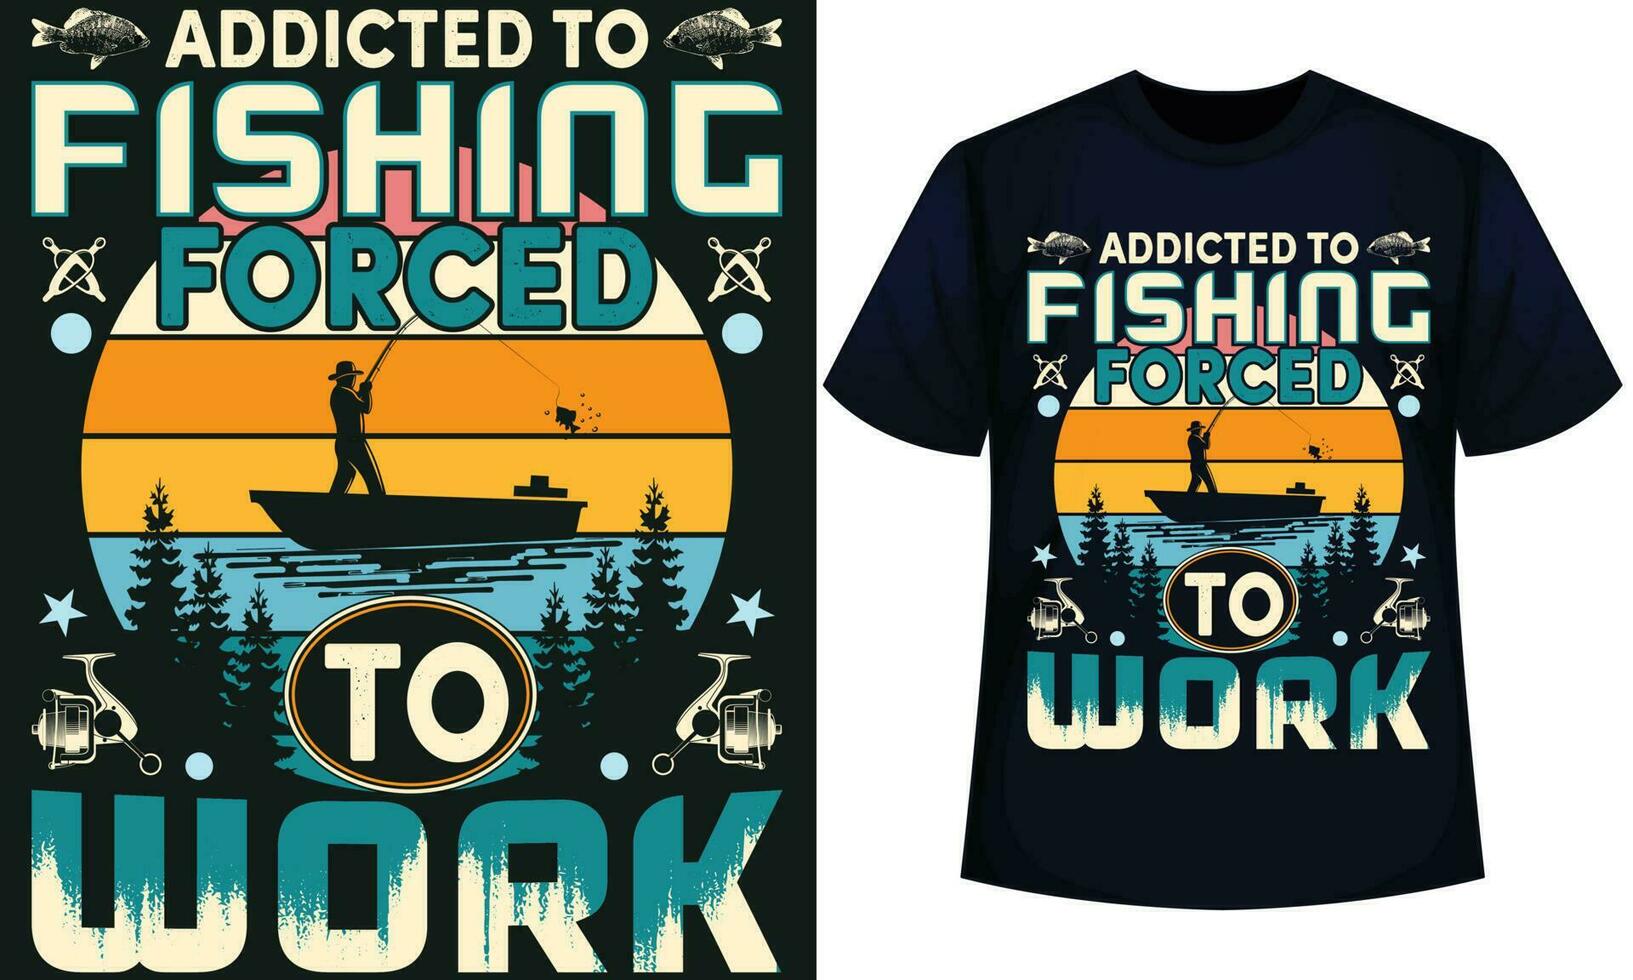 https://static.vecteezy.com/system/resources/previews/023/341/438/non_2x/addicted-to-fishing-forced-to-work-fishing-t-shirt-design-vector.jpg